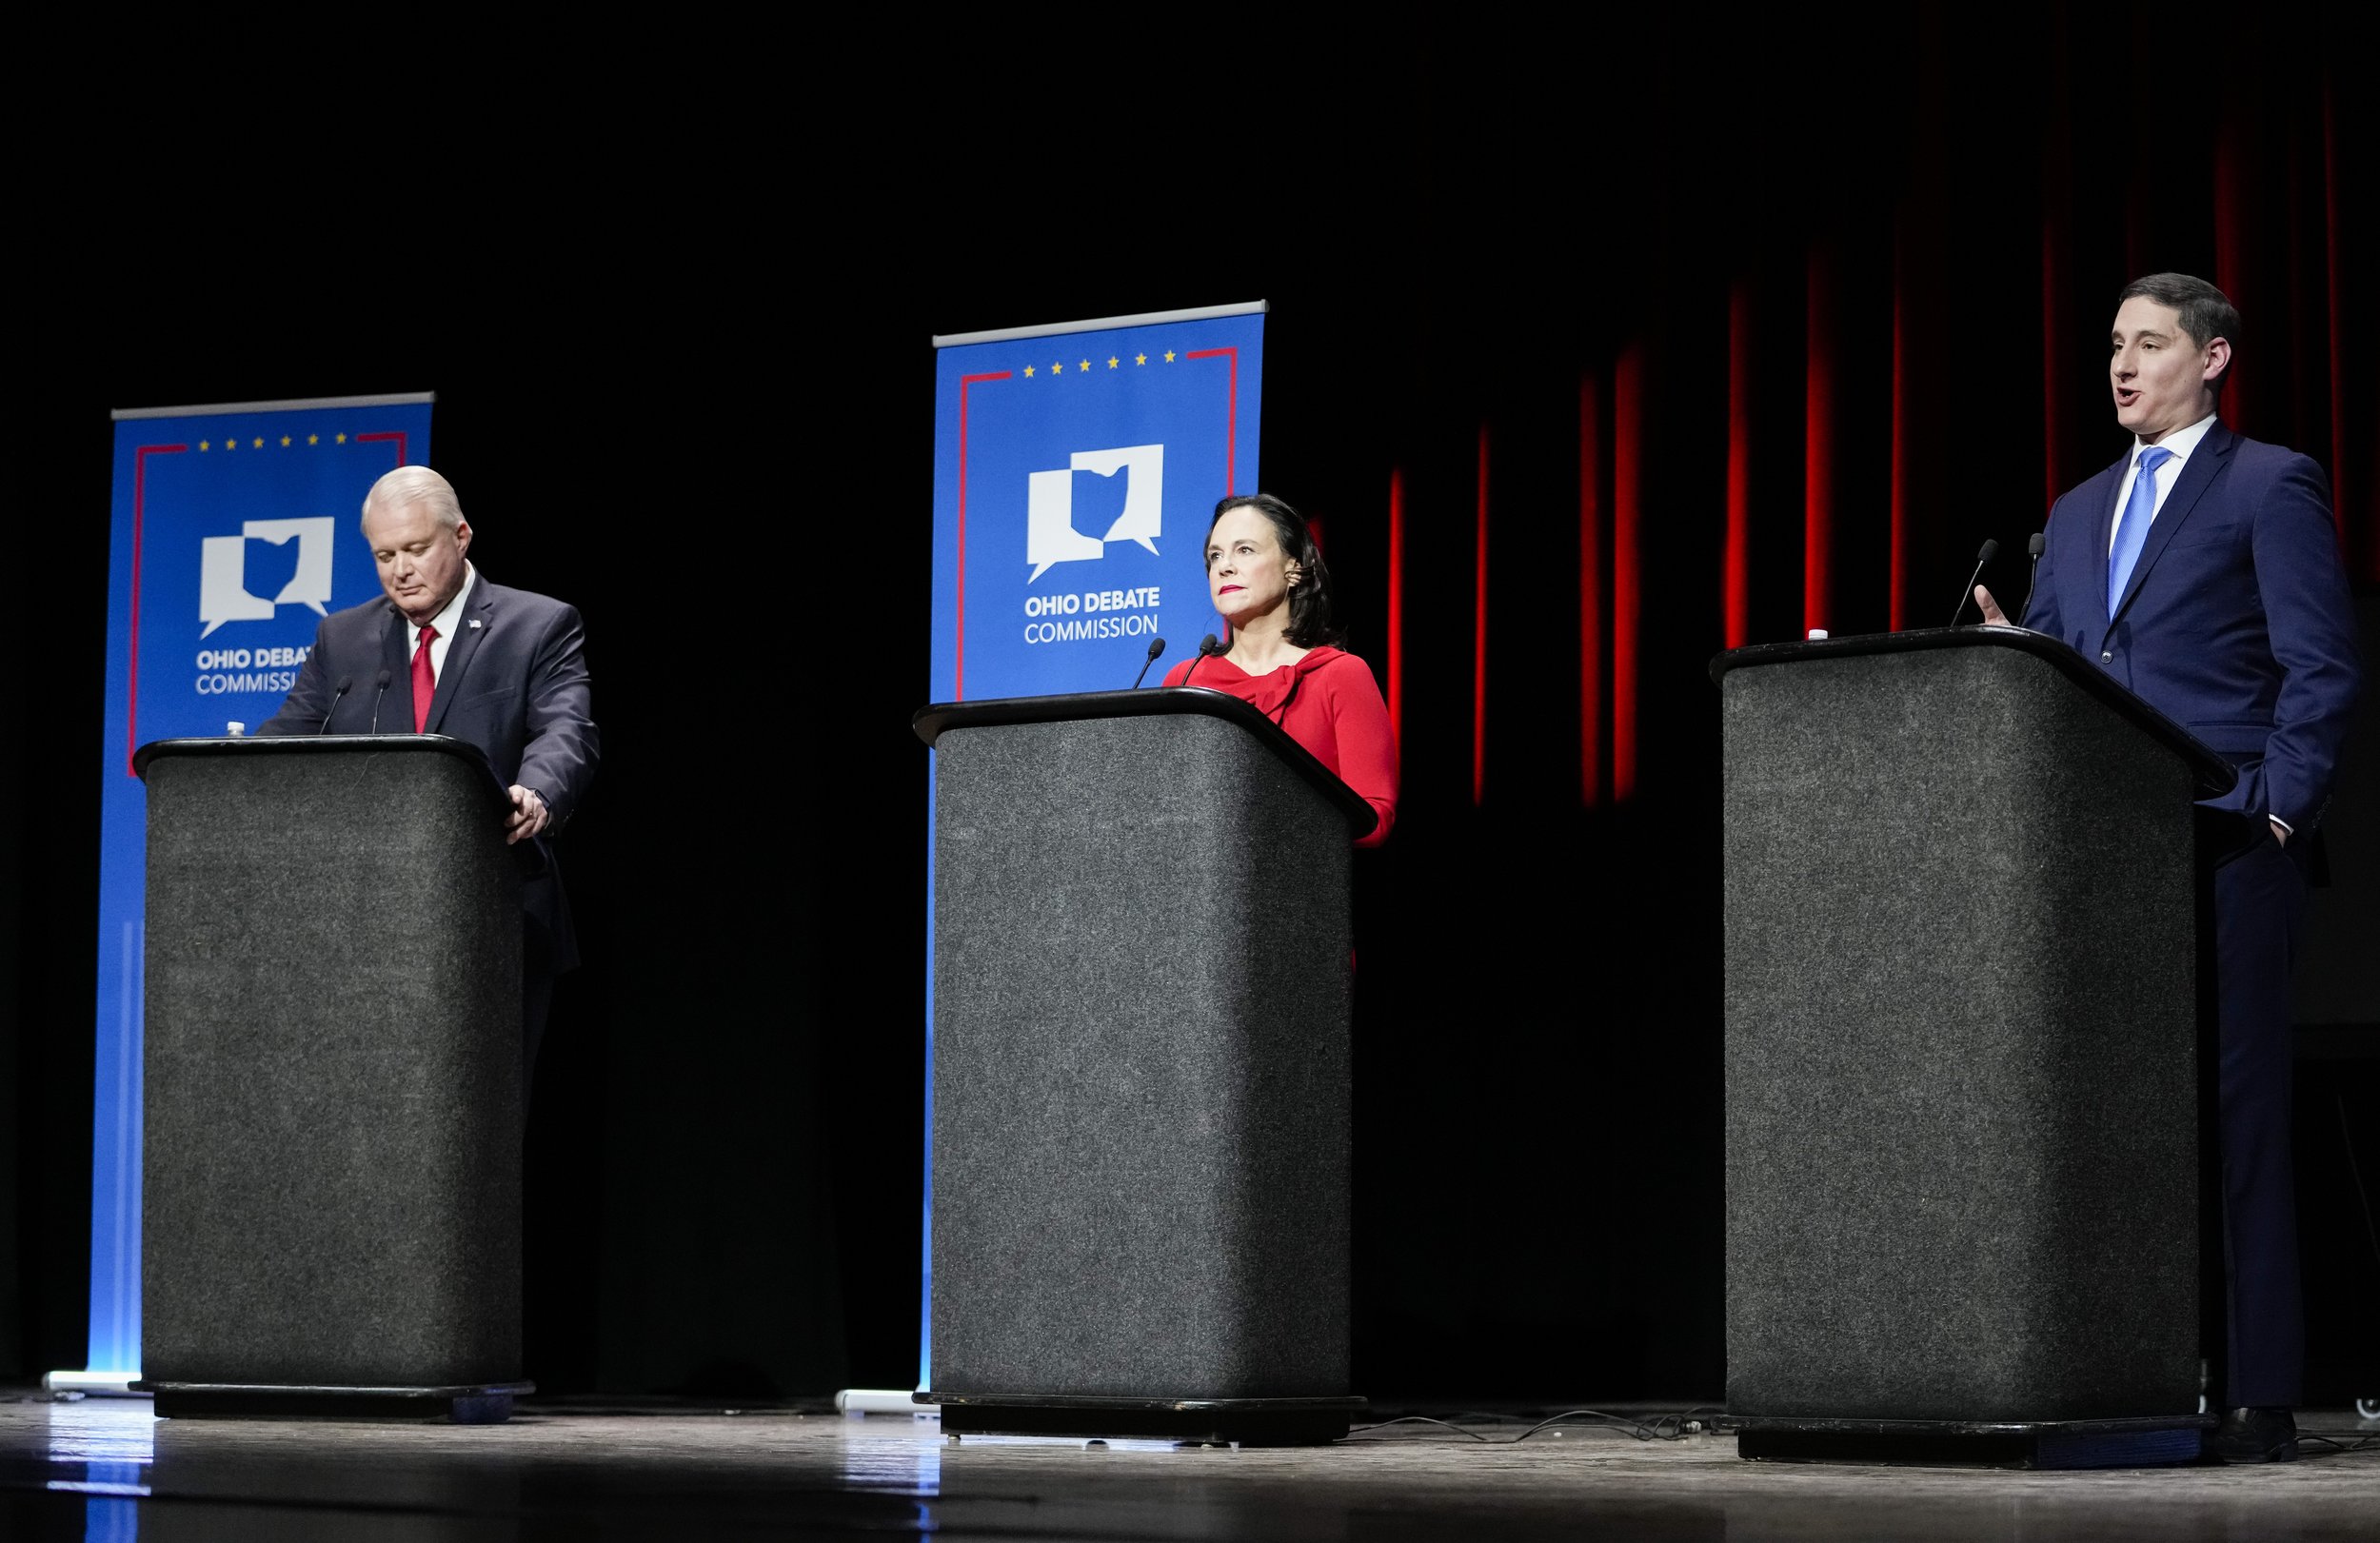  From left to right: Mike Gibbons, Jane Timkin, and Josh Mandel. Photo credit Josh Bickel/Ohio Debate Commission. 